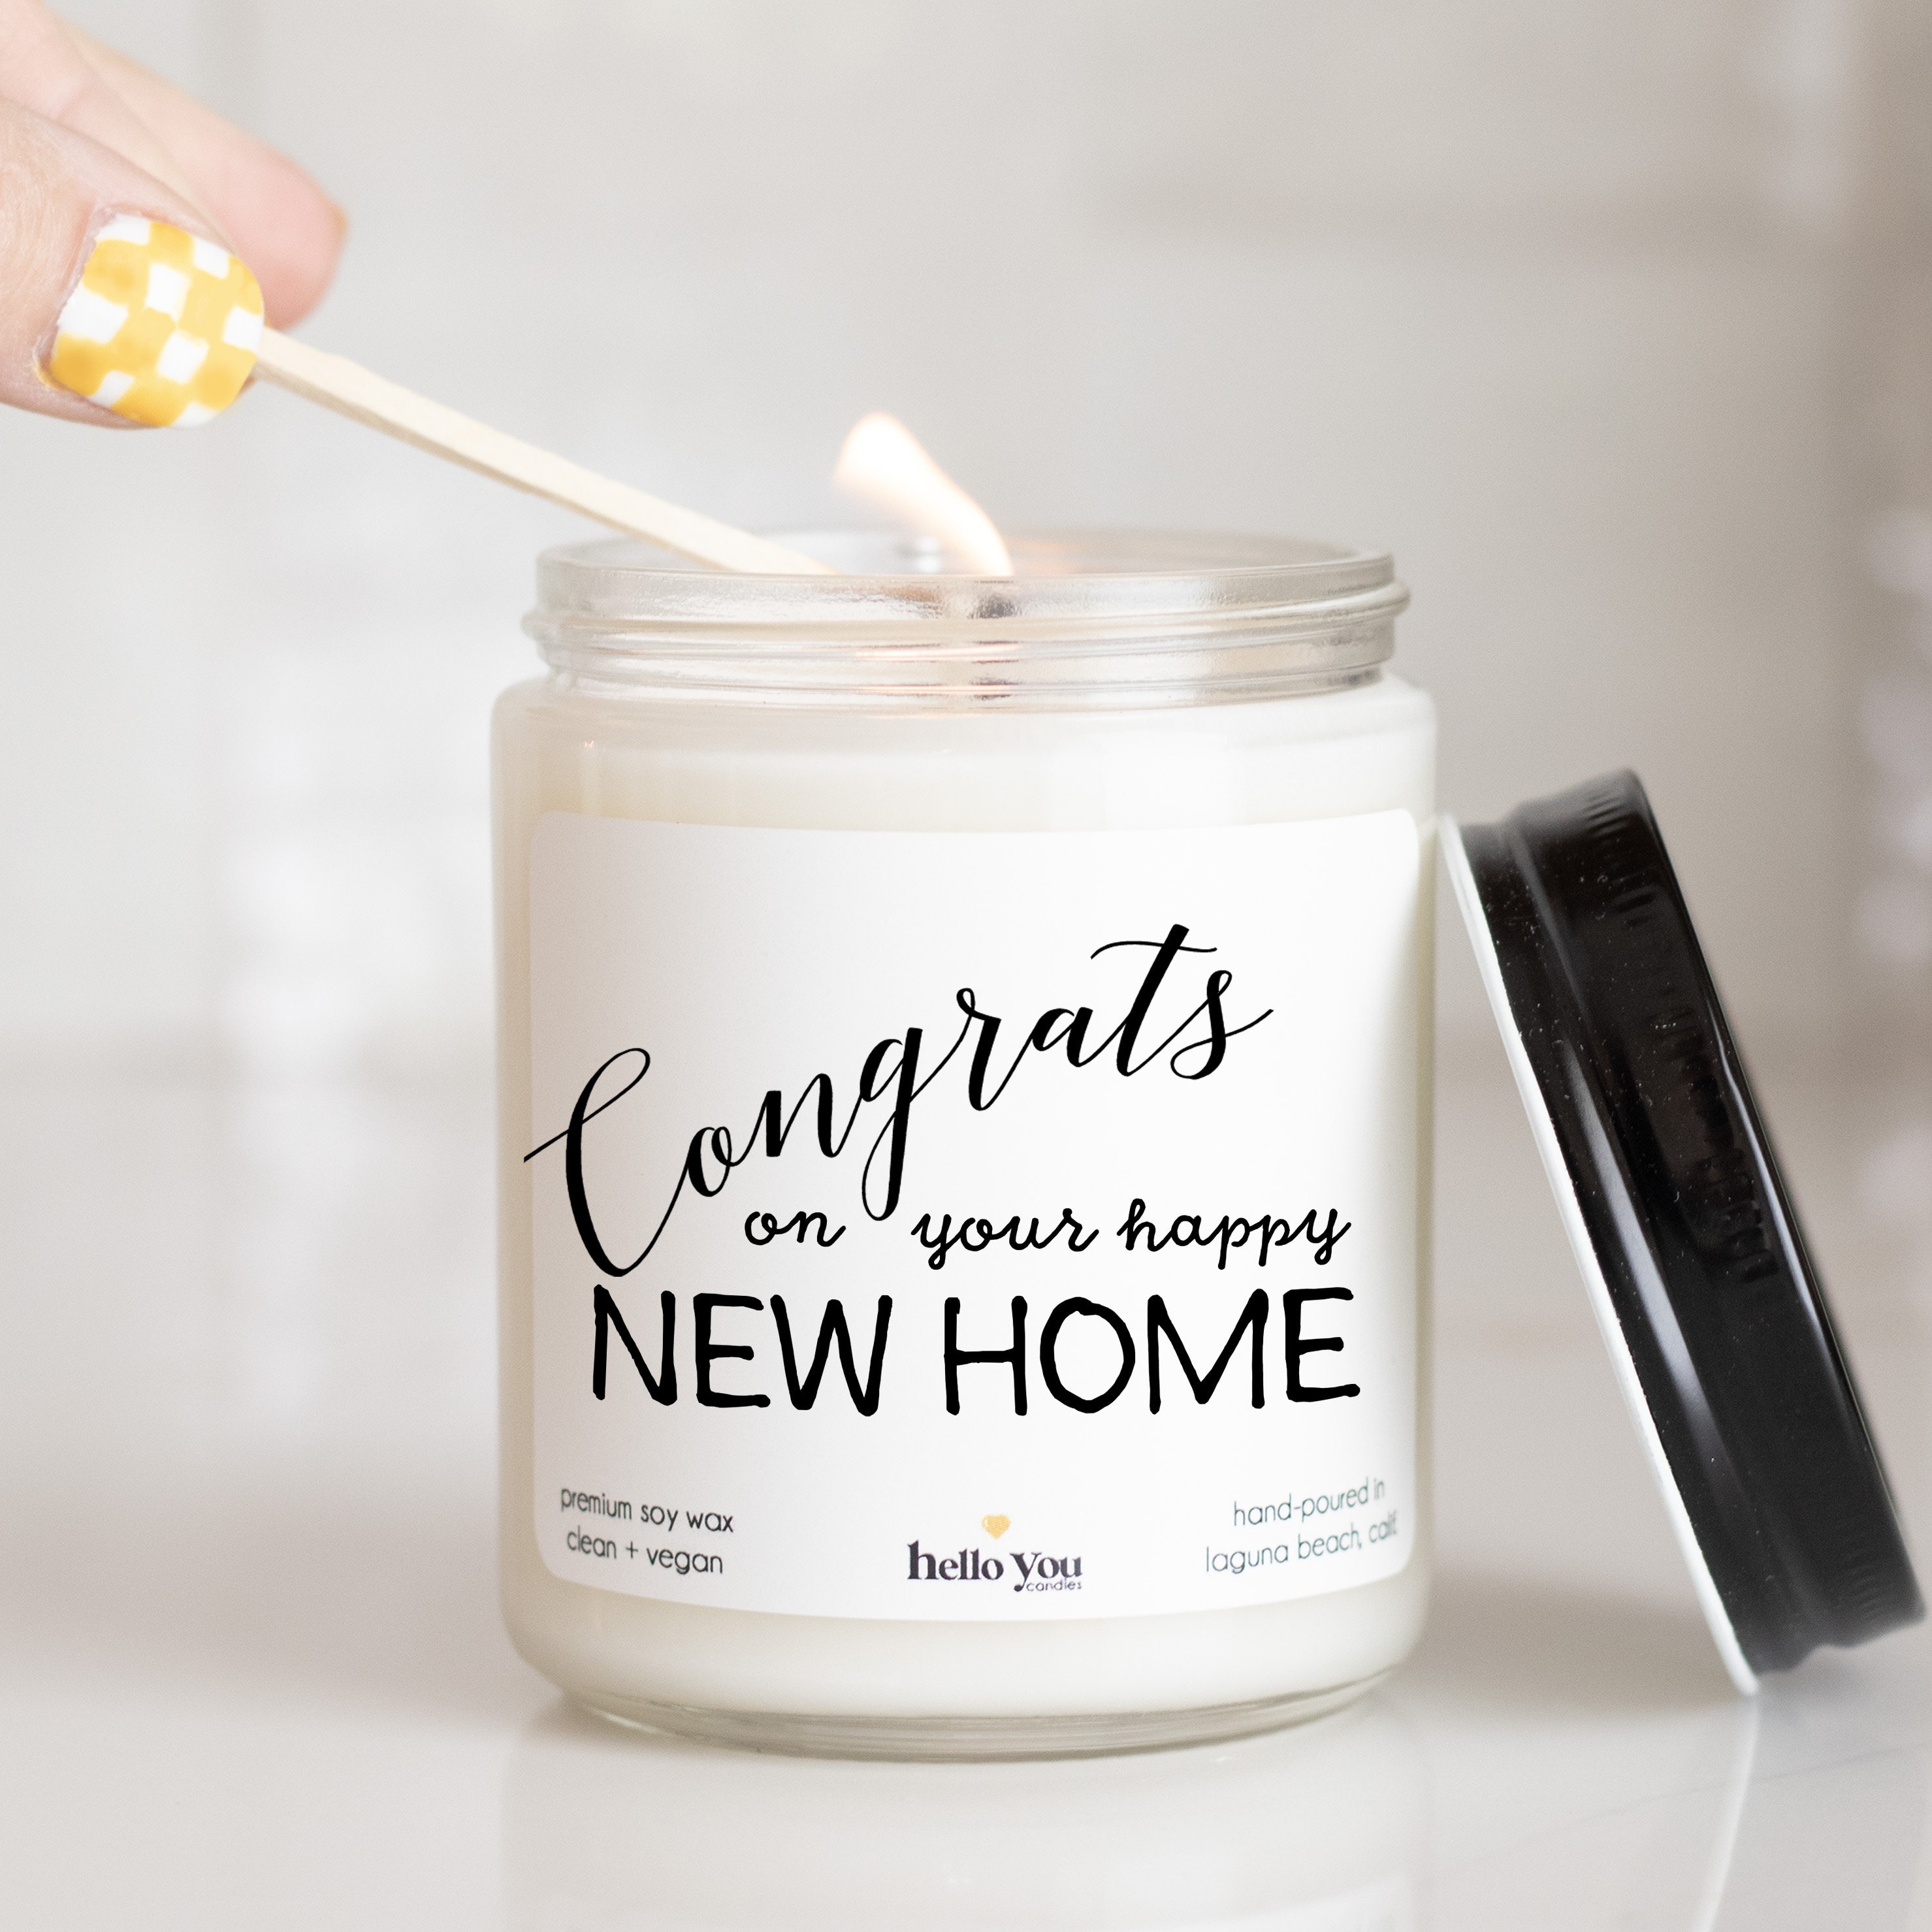 Congrats on Your Happy New Home Candle Gift Scented image